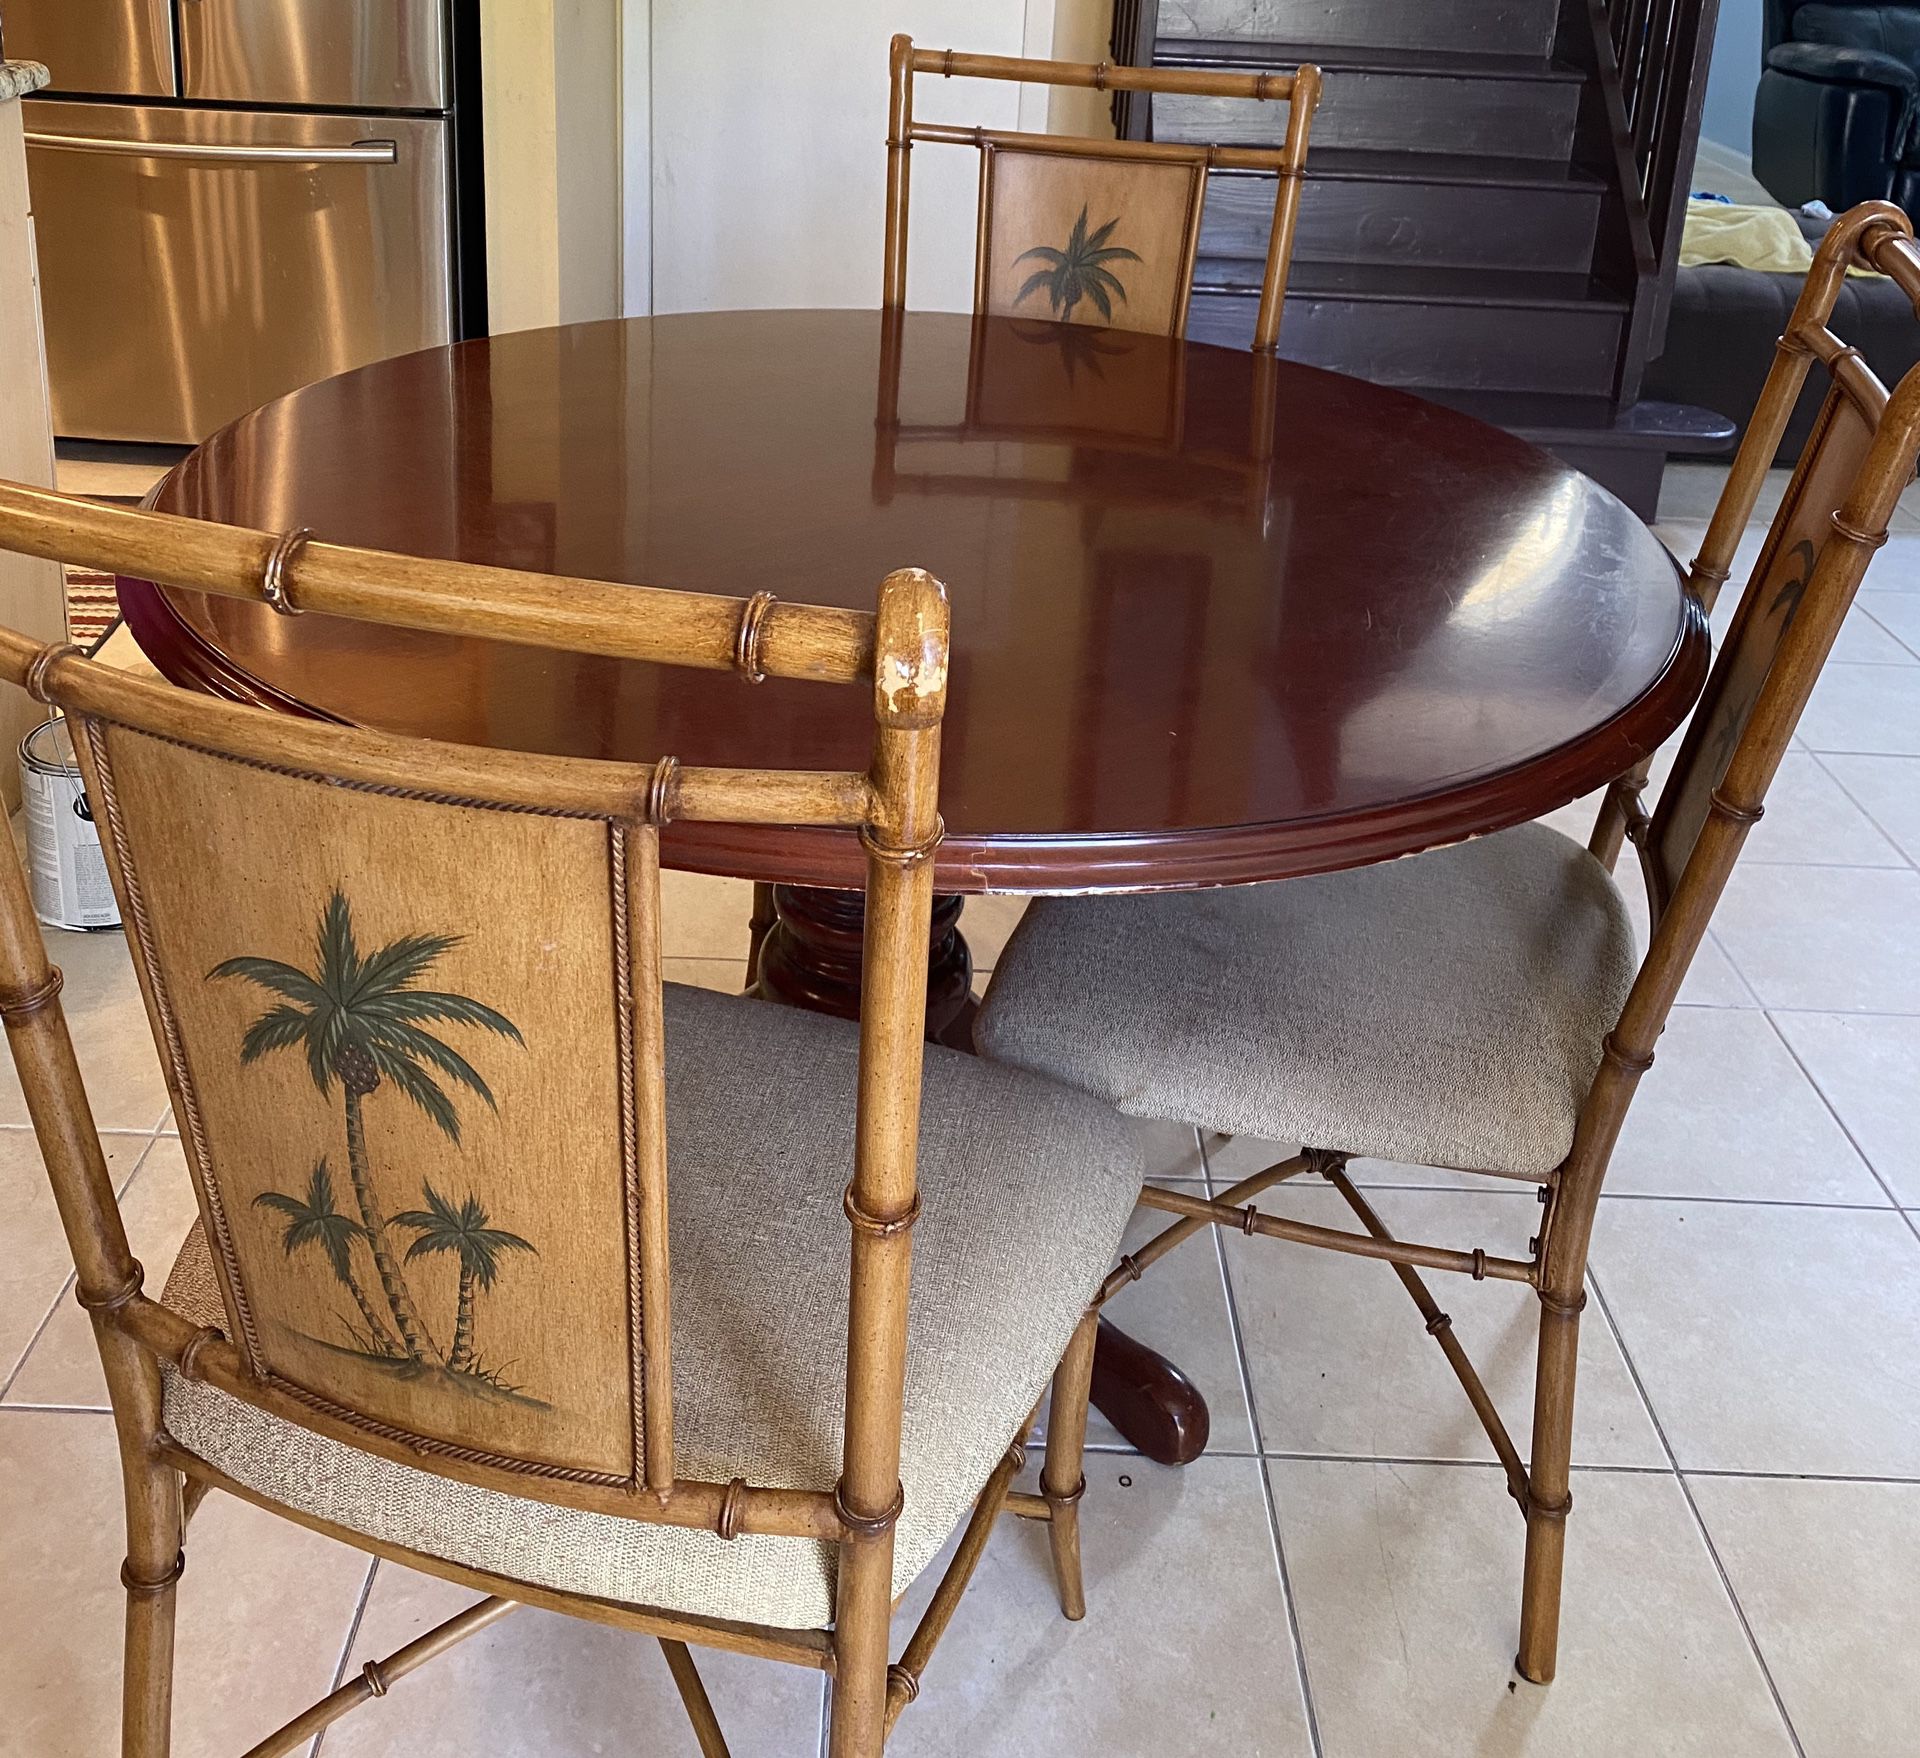 Dining Table with 3 chairs